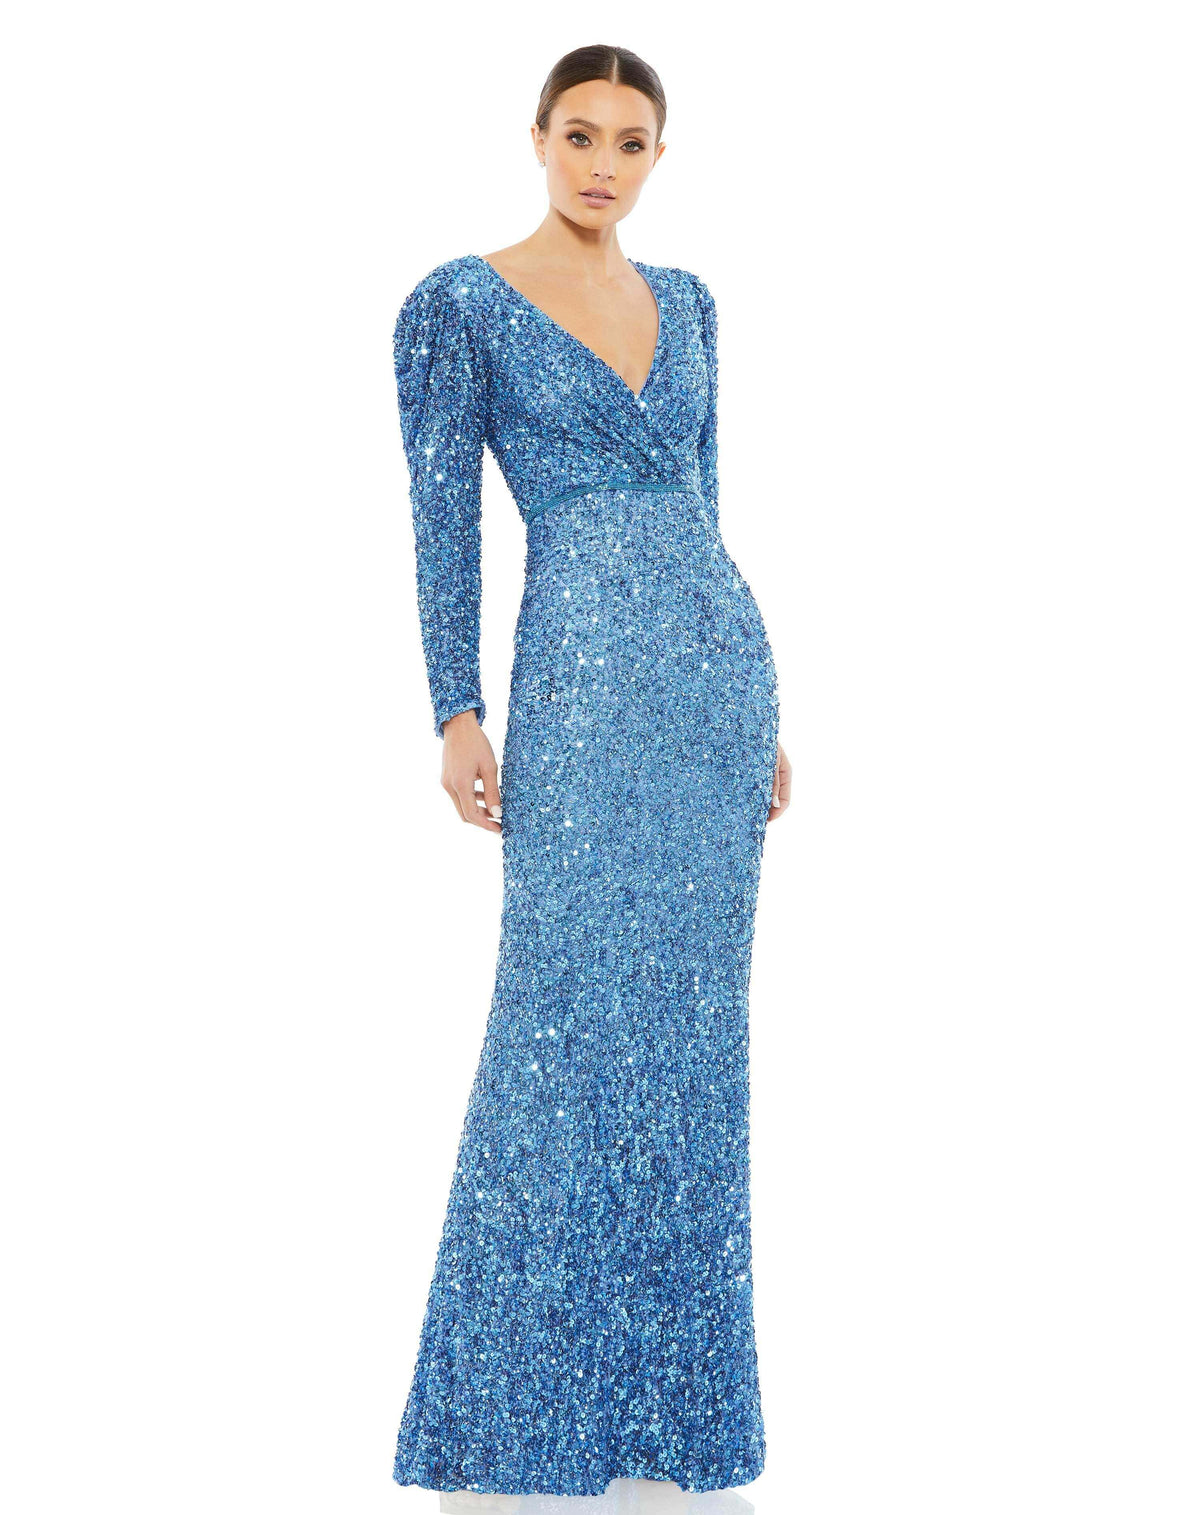 This stunning Mac Duggal elegant long-sleeved, French Blue, sequin, evening gown is a beautiful, full-length sequin-stitched column gown. The demure design is styled with a pleated surplice neckline, long sleeves with puff shoulders, a hand-beaded waist, and a sweep train. It’s a gorgeous show-stopping choice for your next formal event. 